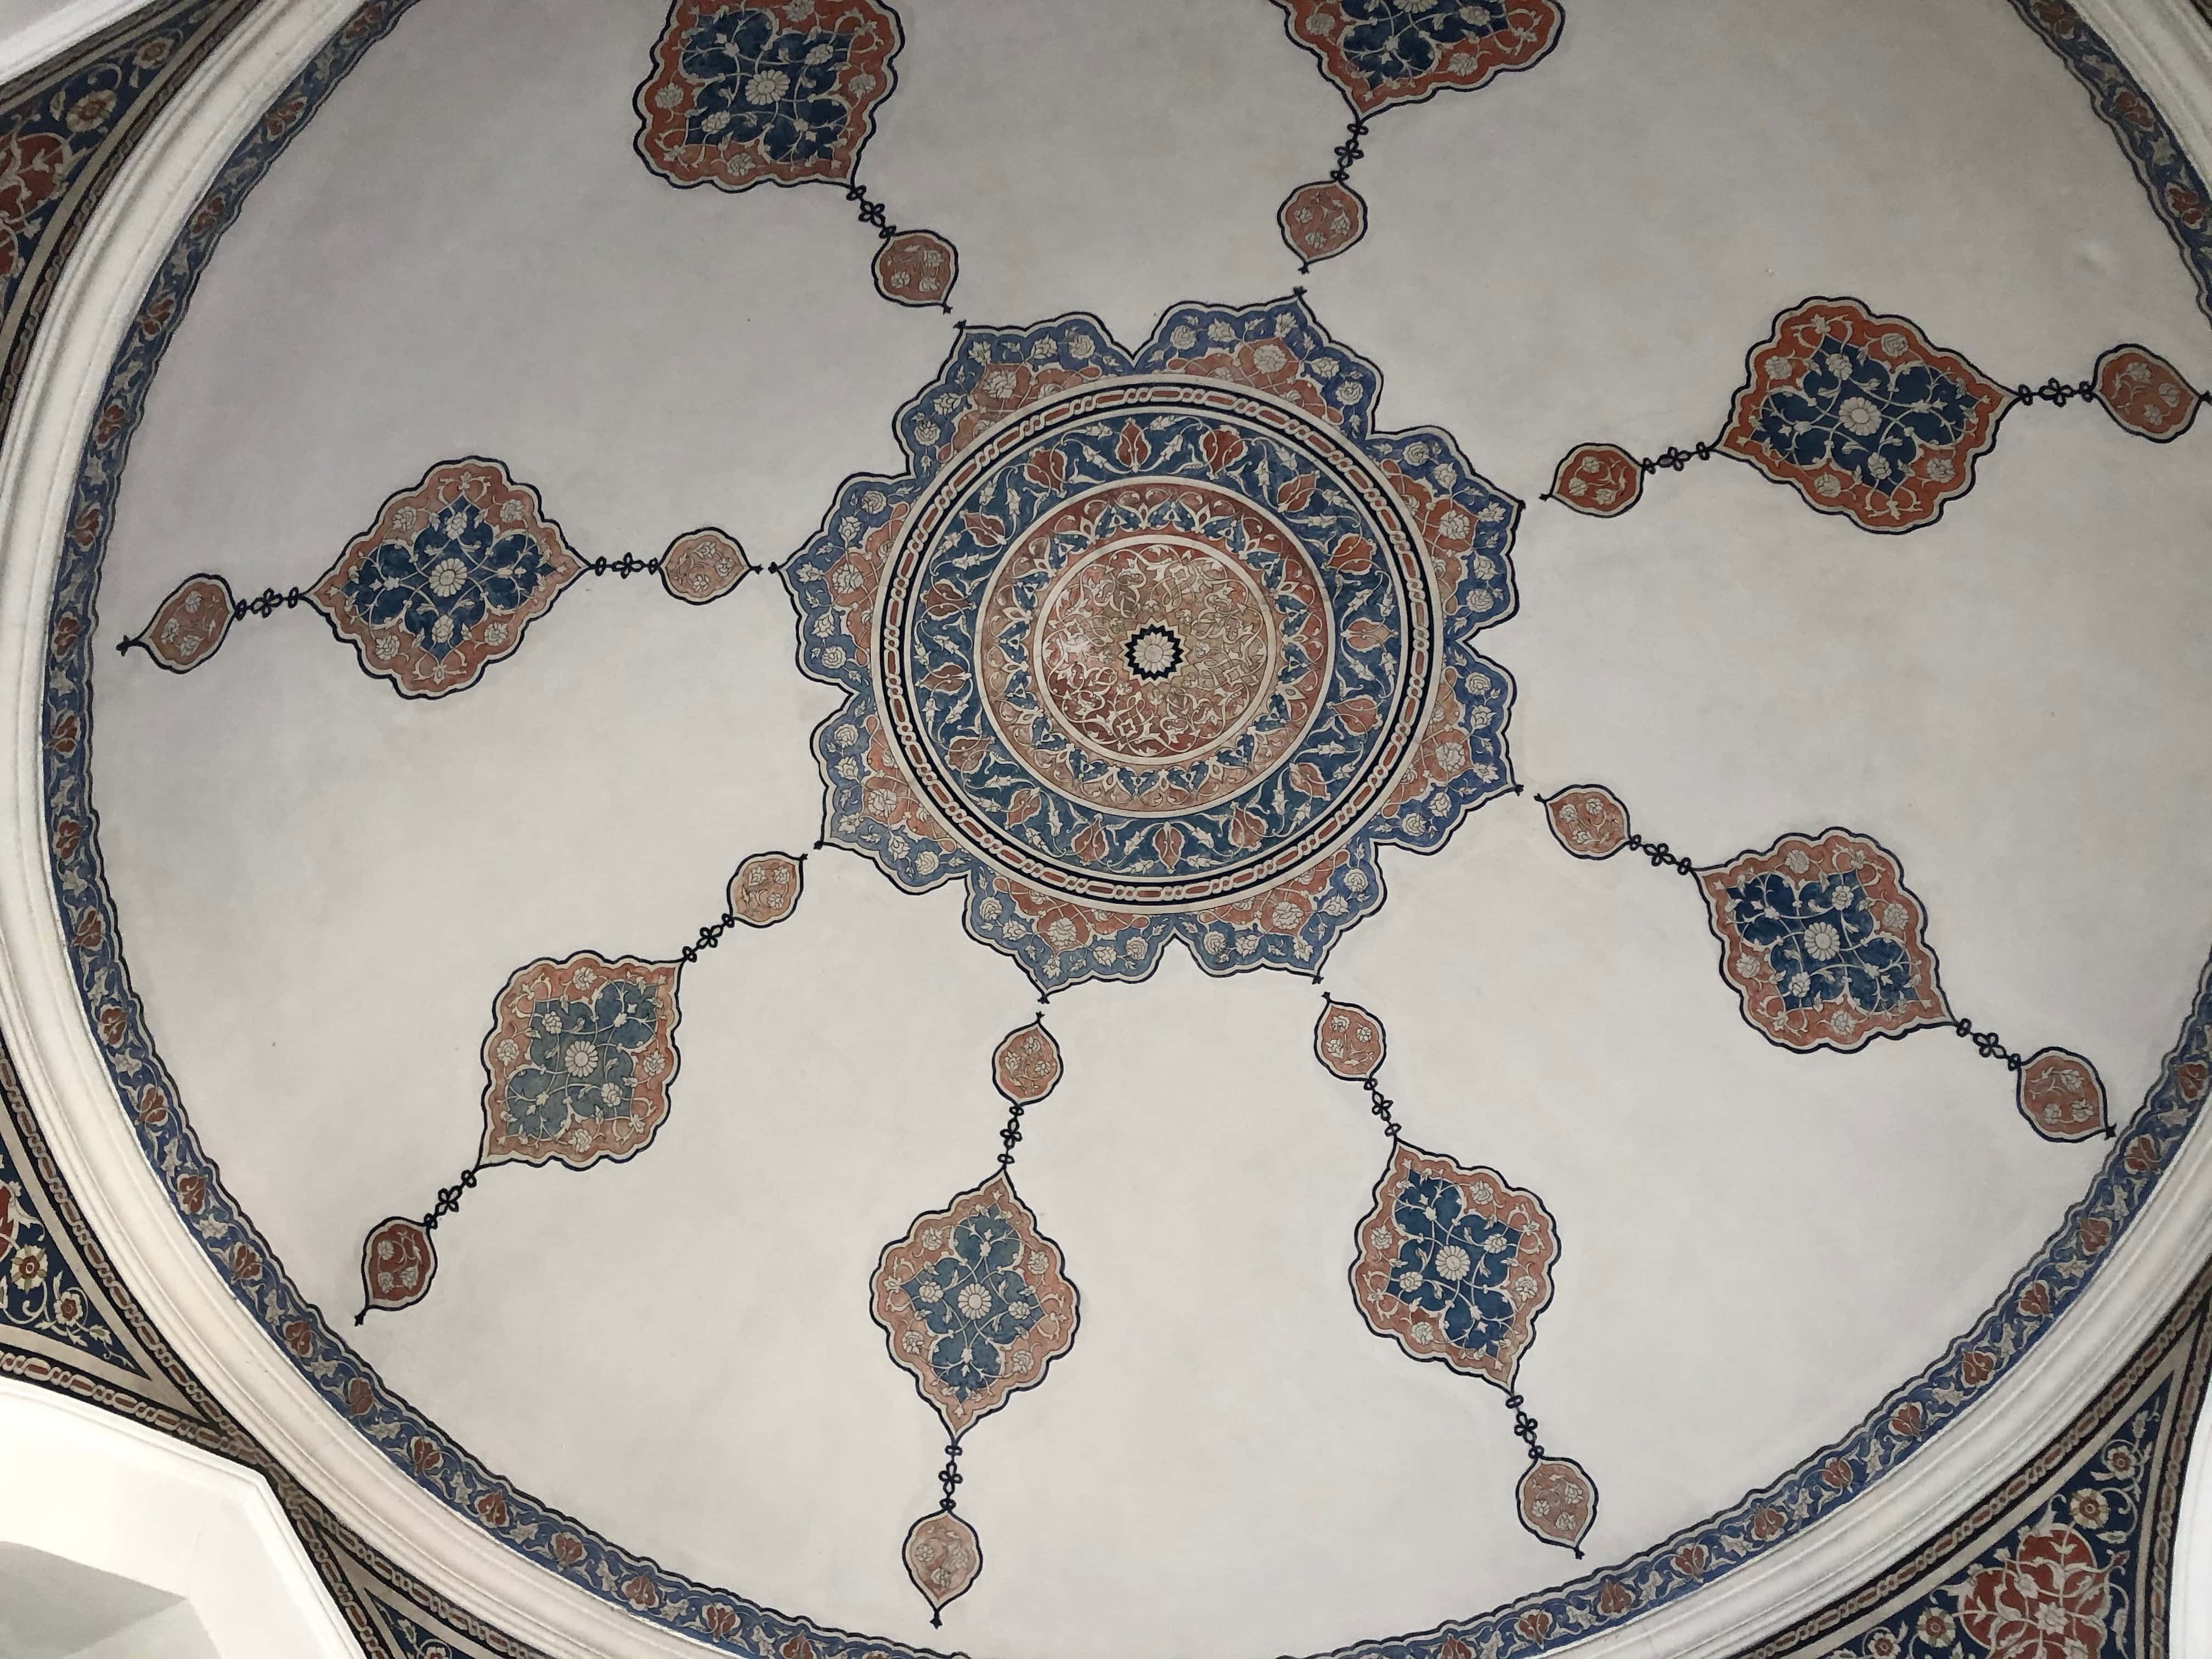 Underside of the dome of the fountain at Taksim Square in Istanbul, Turkey